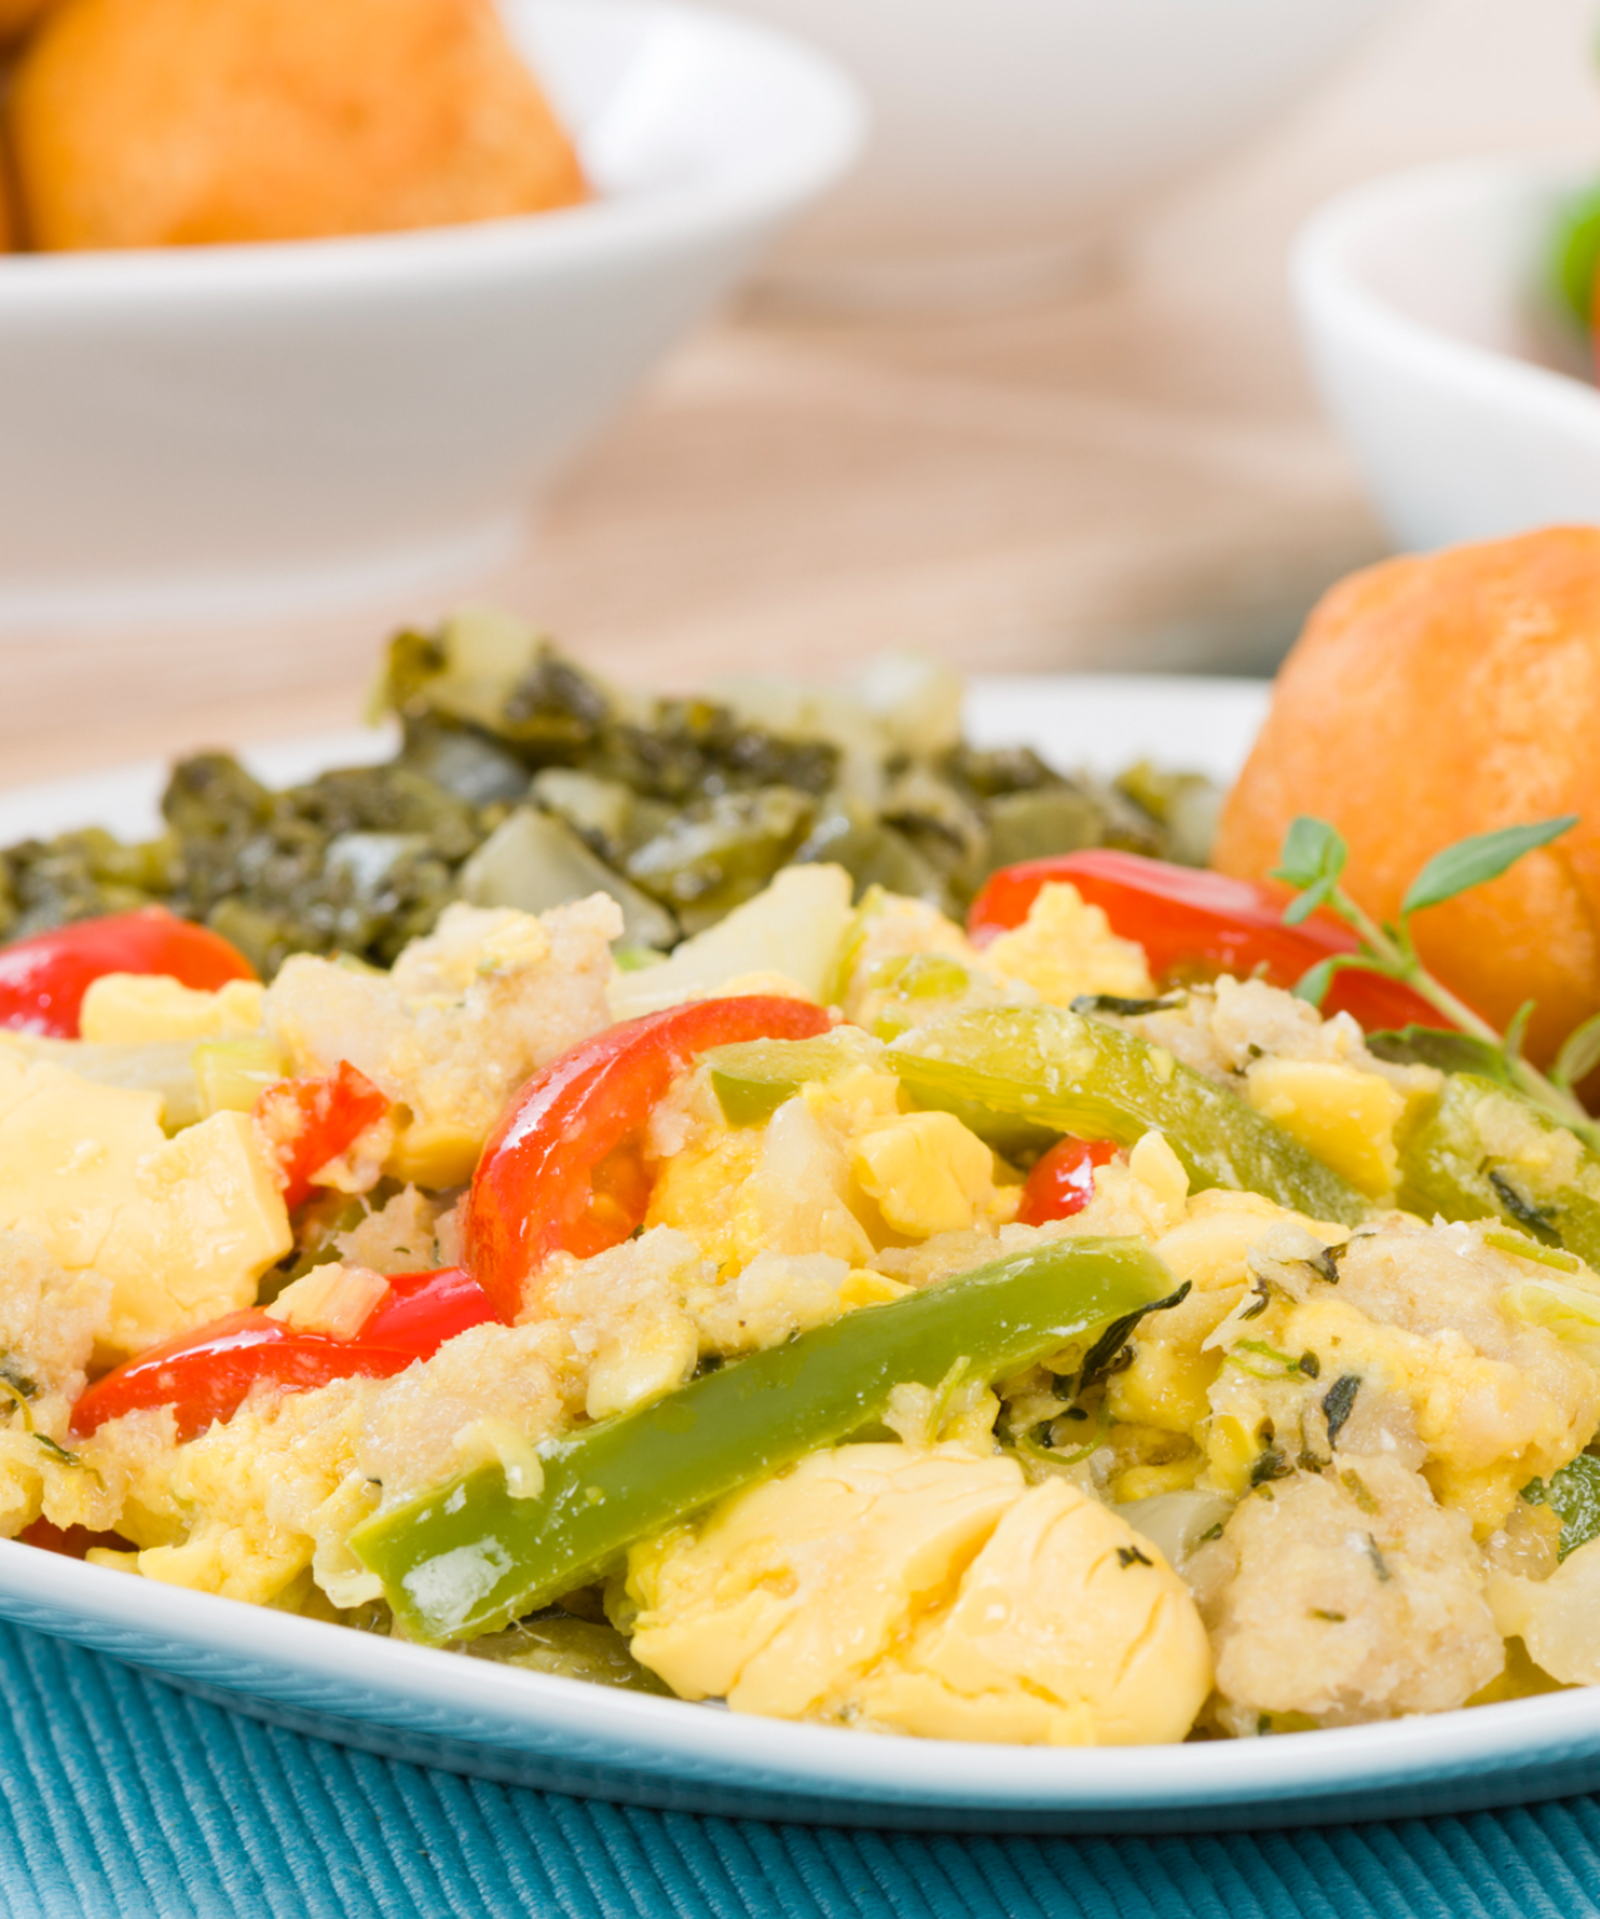 A plate of Ackee and saltfish